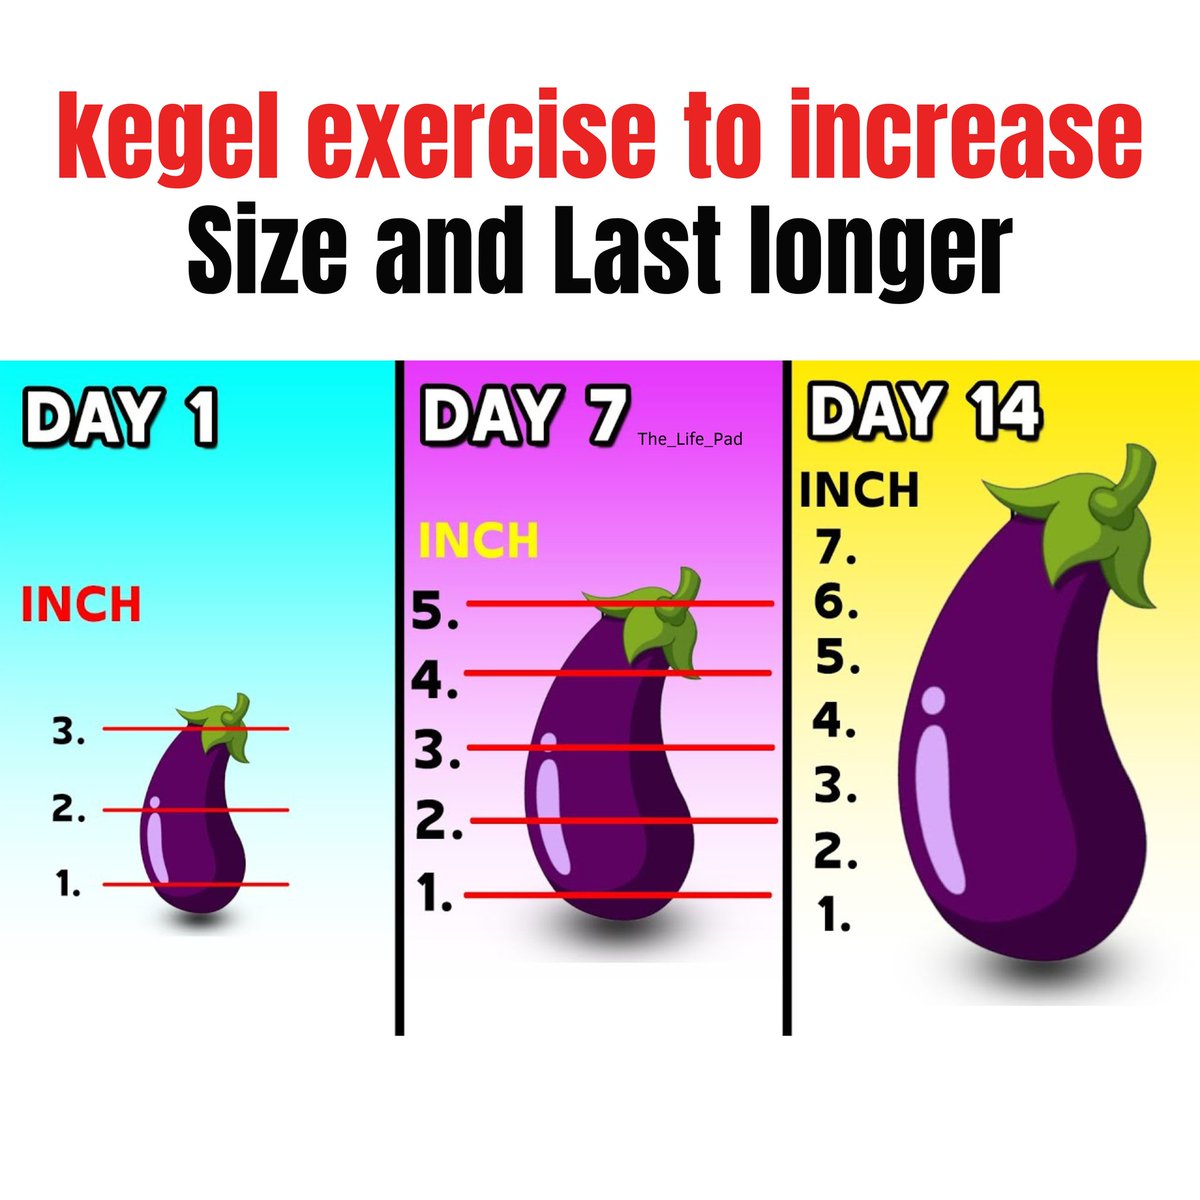 Kegel exercises to increase your size and Last longer on bed, Men learn to satisfy your woman